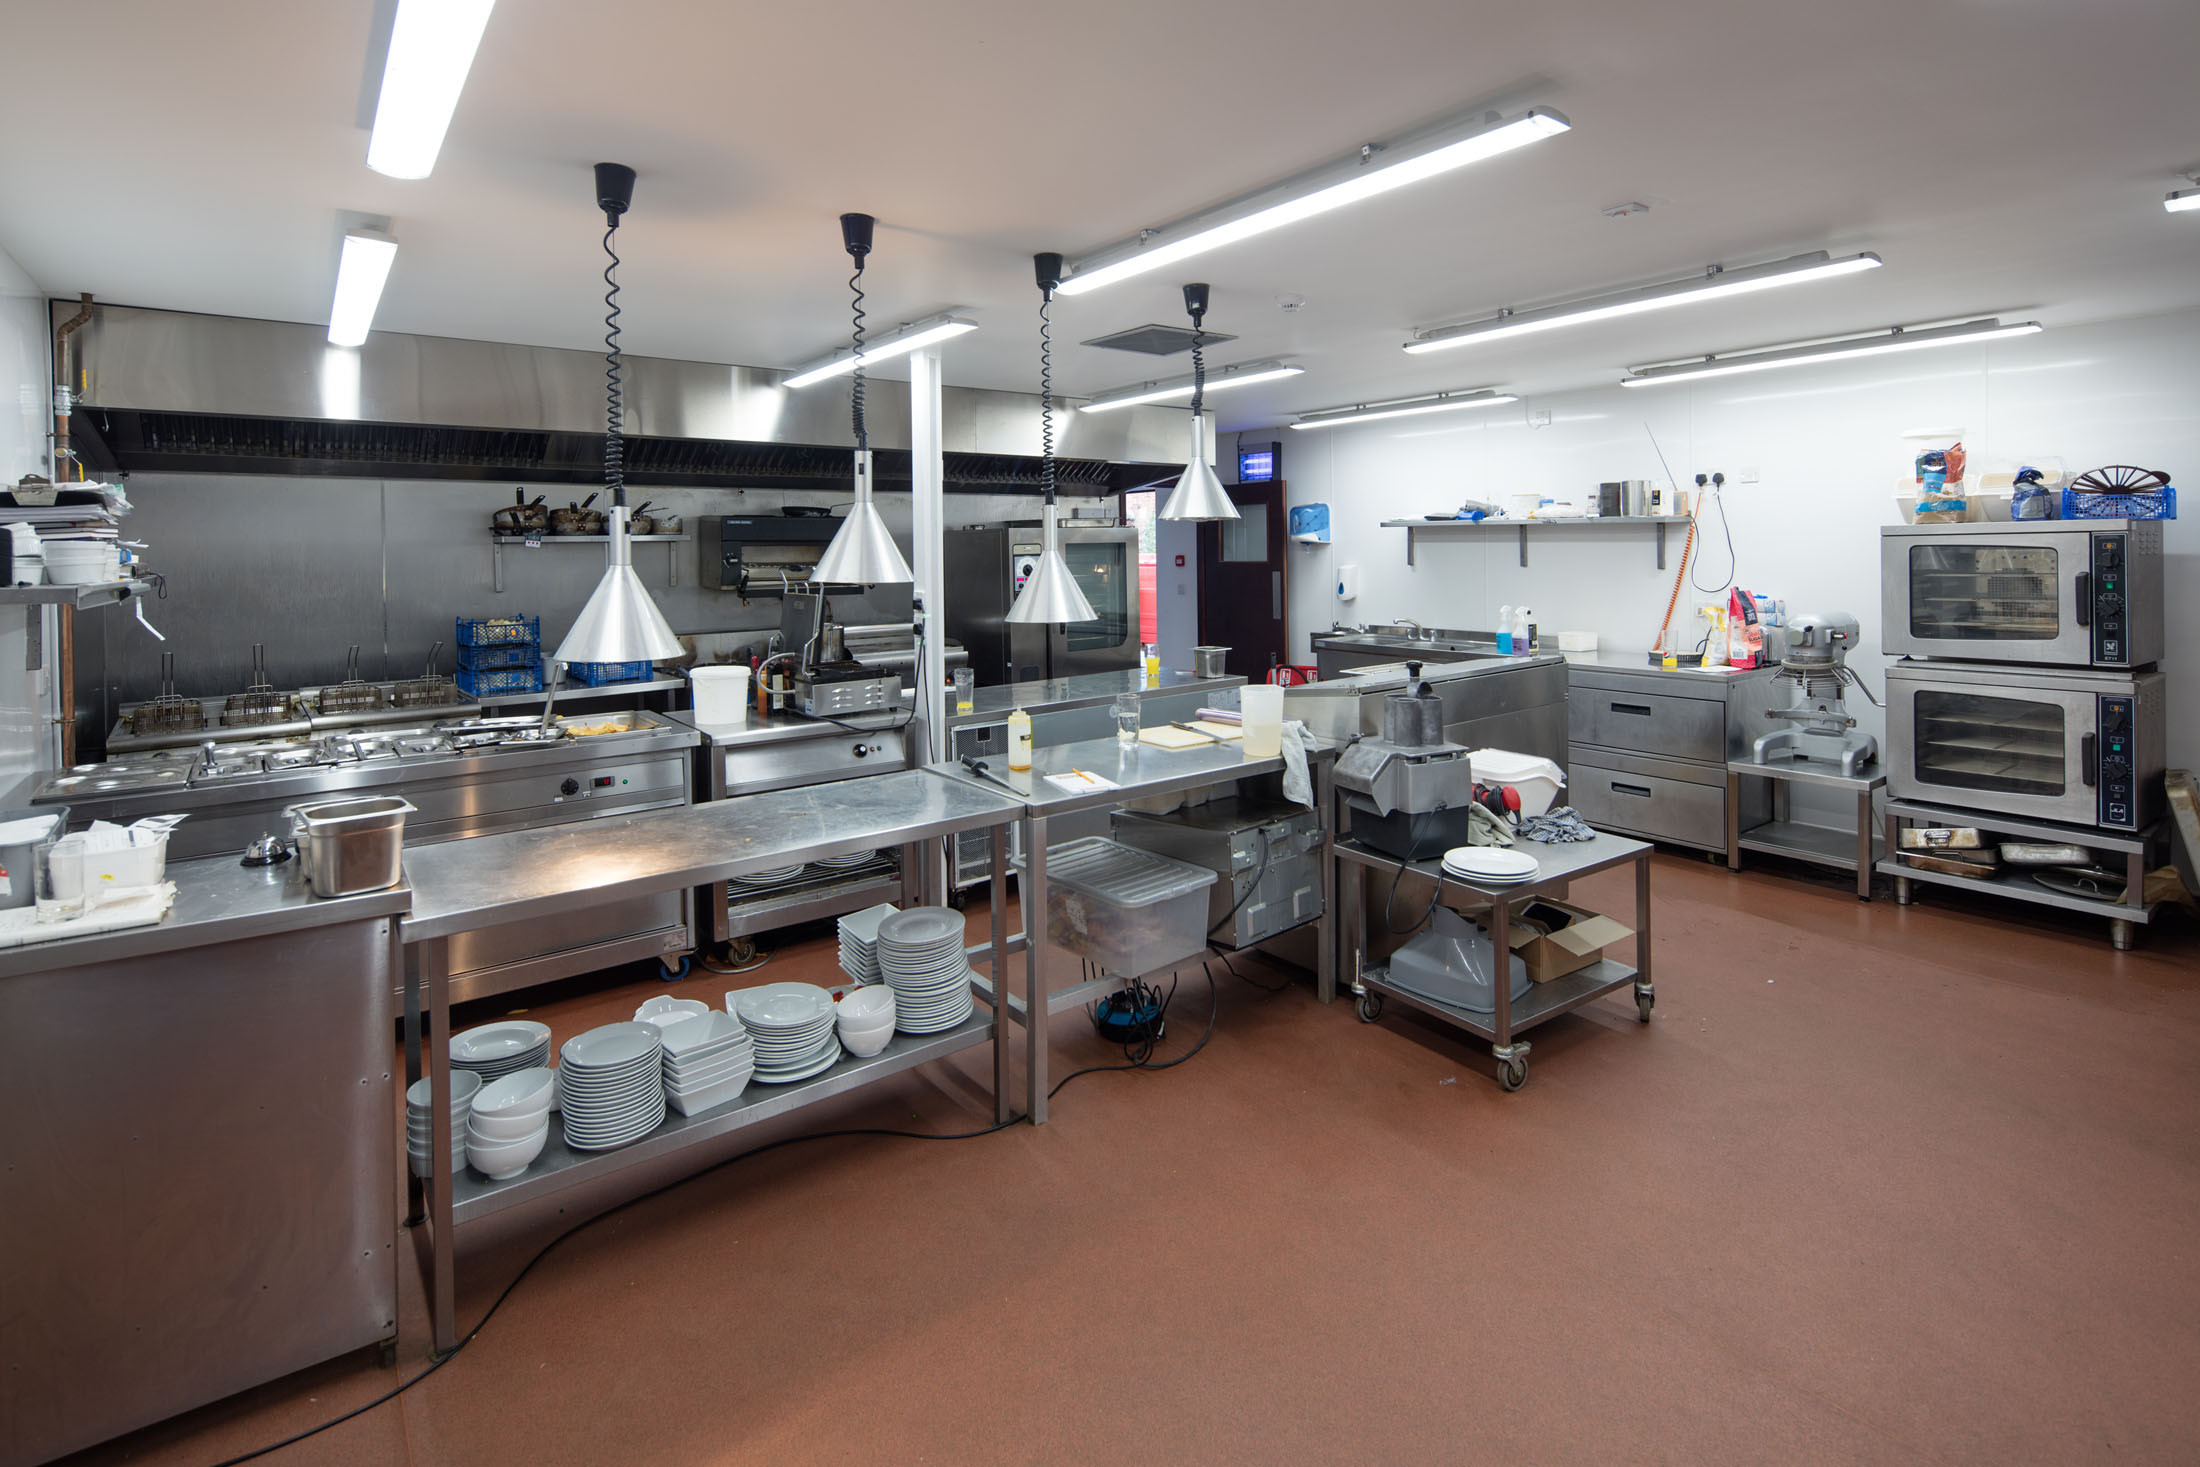 Commercial Kitchen Lighting Lovely Professional Hotel And Resort Photography In The Uk Of Commercial Kitchen Lighting 